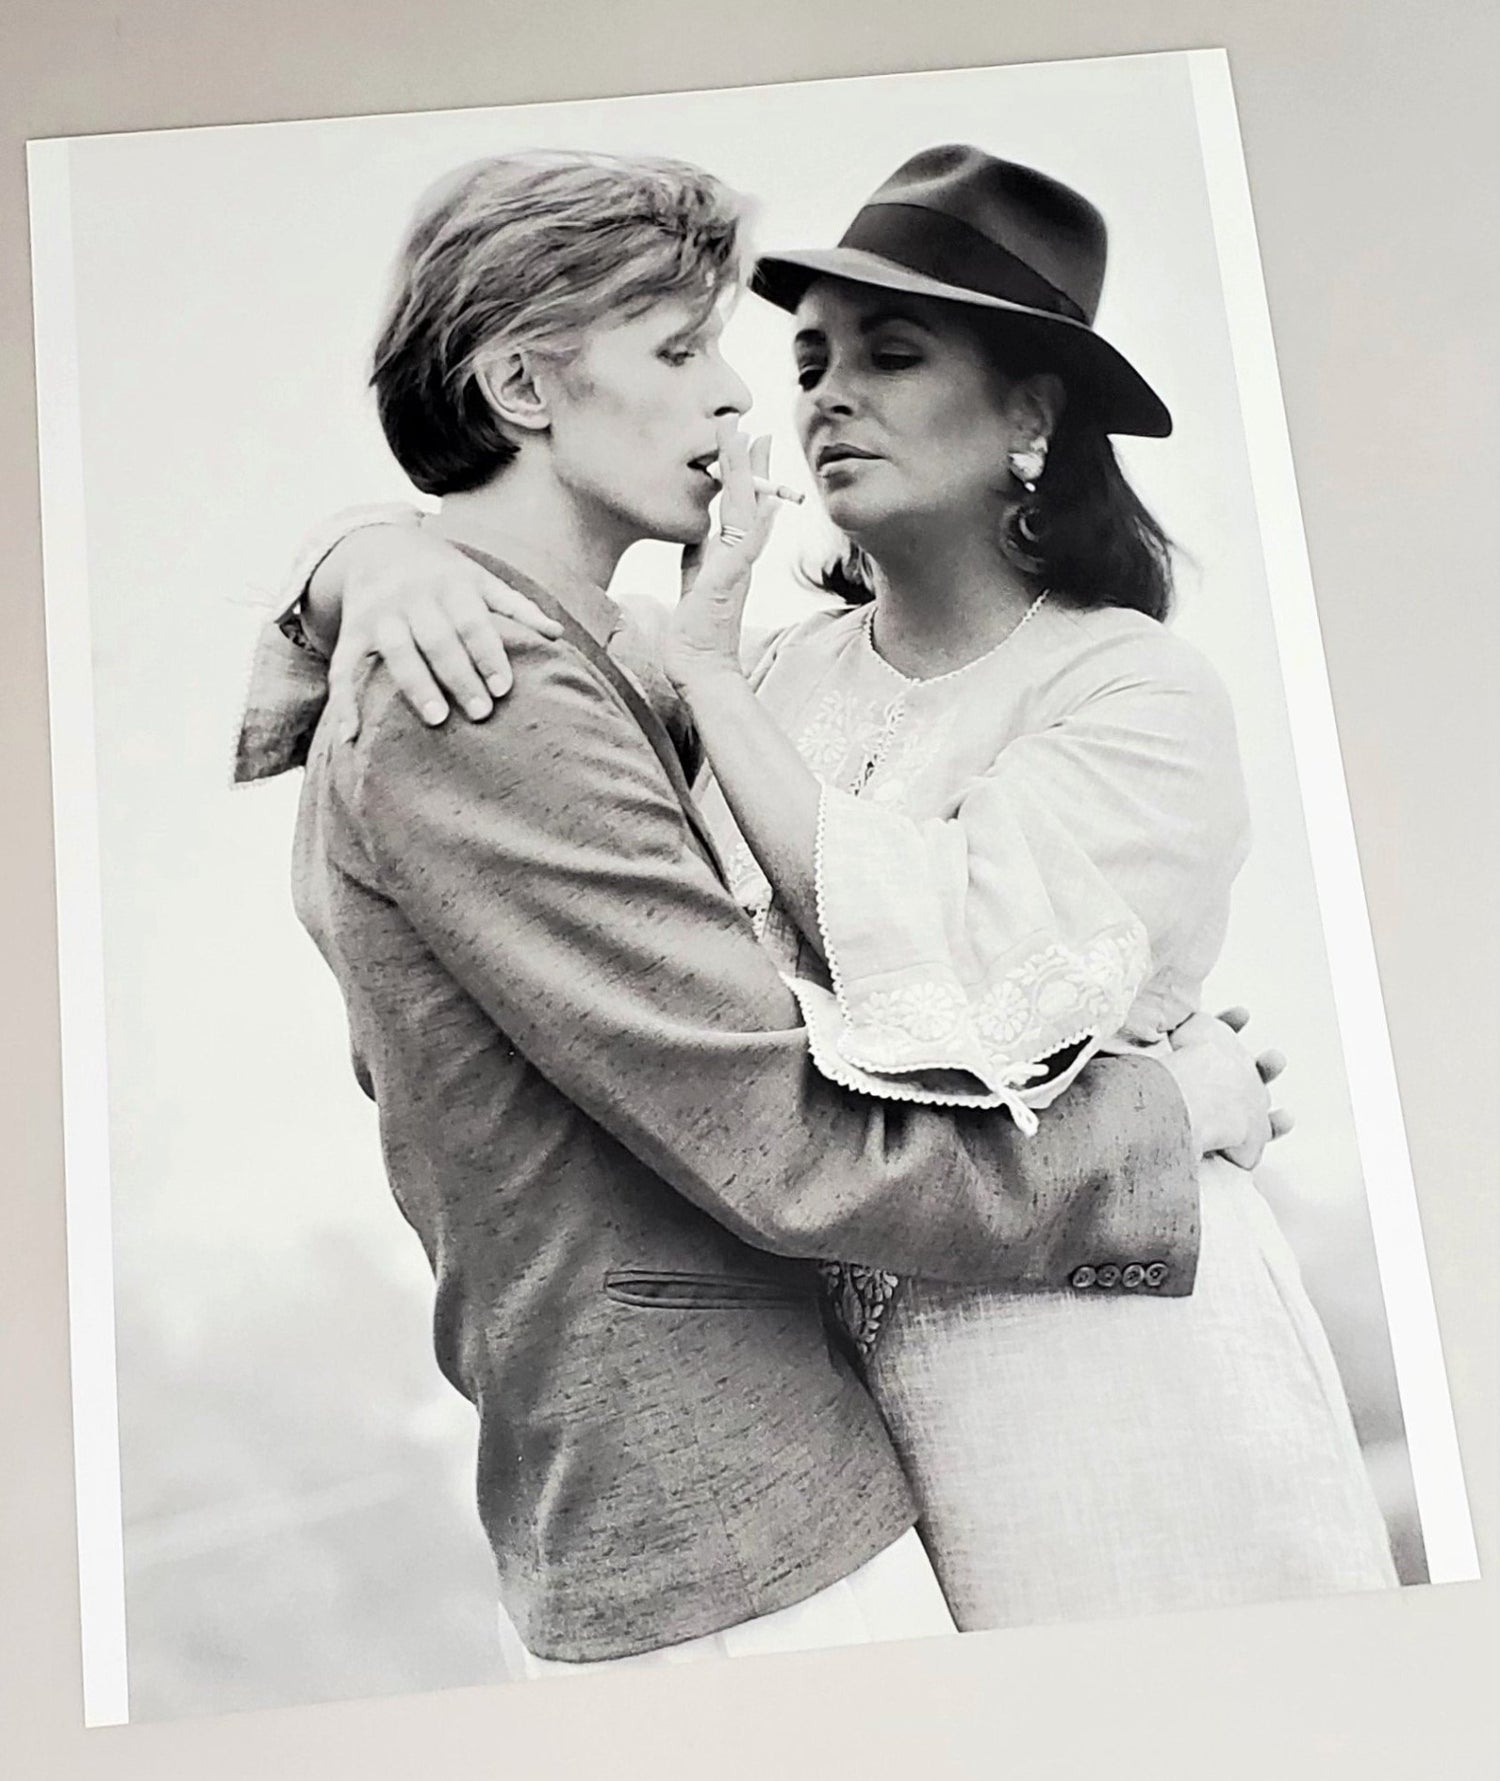 Photograph page of Bowie & Elizabeth Taylor in 1975 featured in 2010 David Bowie hardcover book by Jeff Hudson